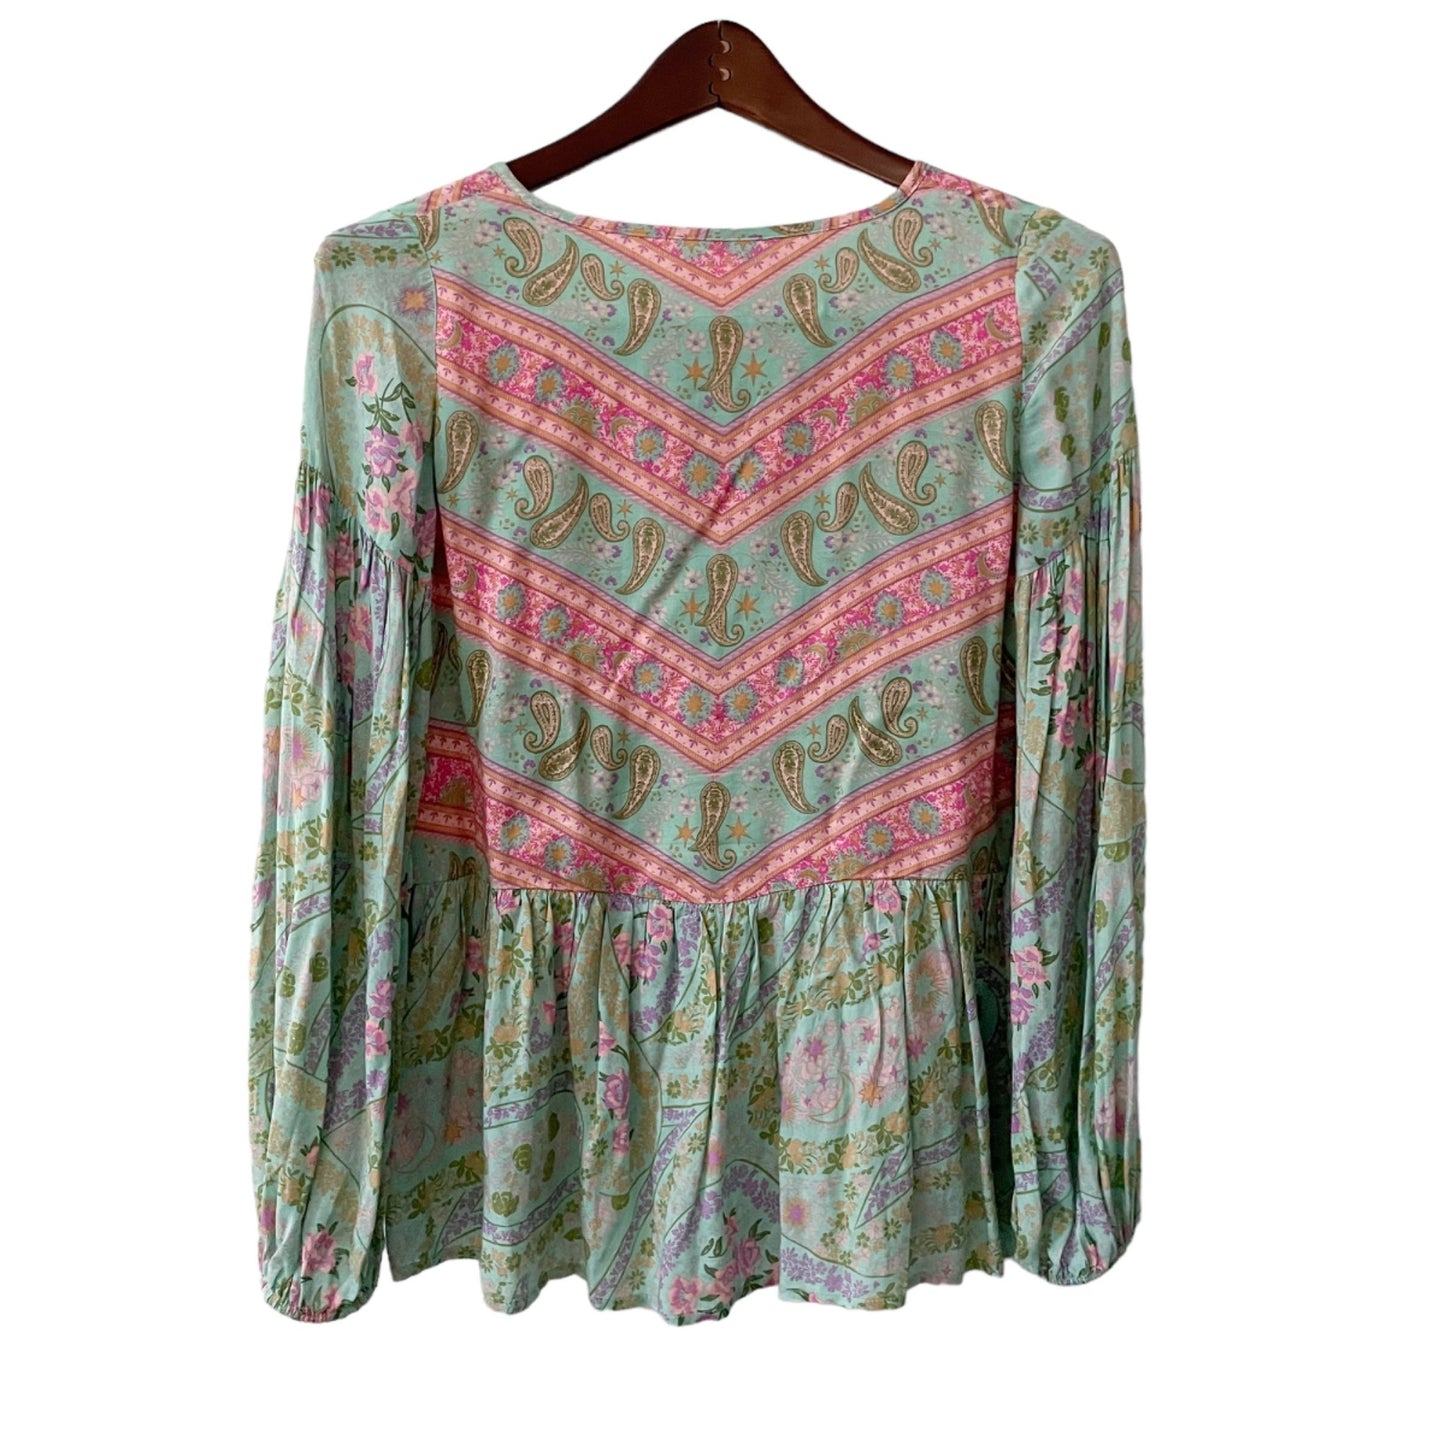 Spell & the Gypsy City Lights Sage Green Paisley Lace-Up Blouse Women's Size XS